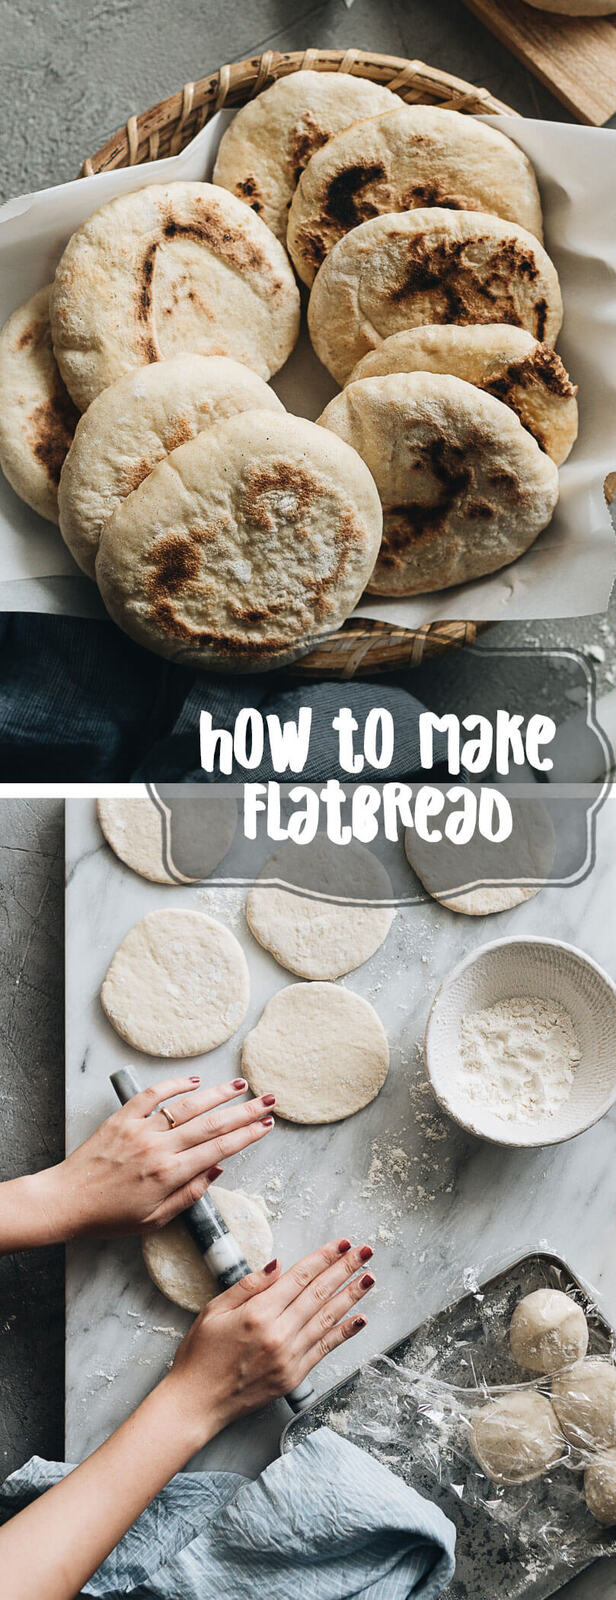 This super fast and easy flatbread recipe will totally blow your mind because it uses only 2 ingredients and 15 minutes of active cooking. You can use it to make pork belly buns or serve the bread with curry. So versatile! #vegetarian #vegan #bread #easy #recipes